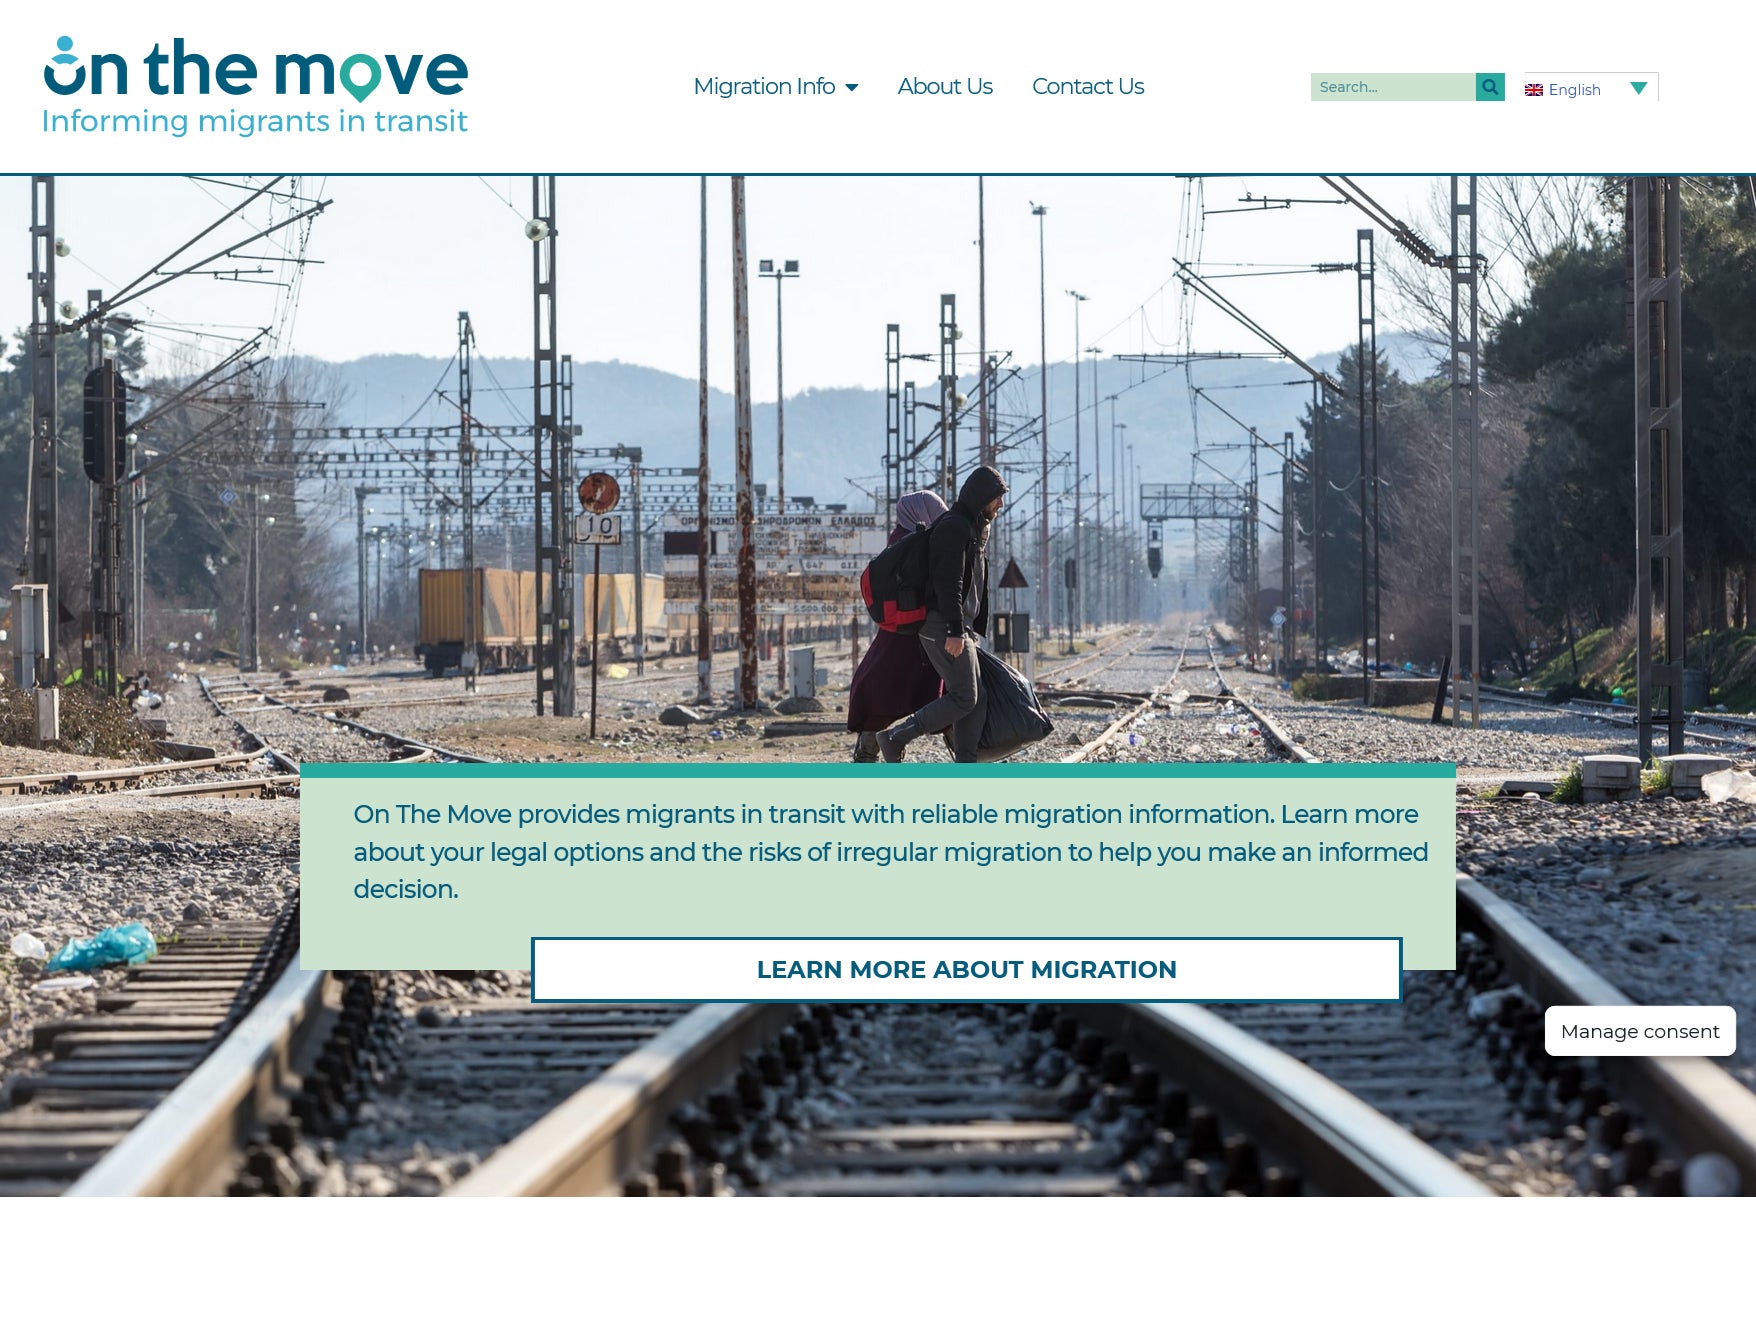 Seefar is behind websites including ‘On The Move’, which was used in a Home Office campaign to deter Channel crossings